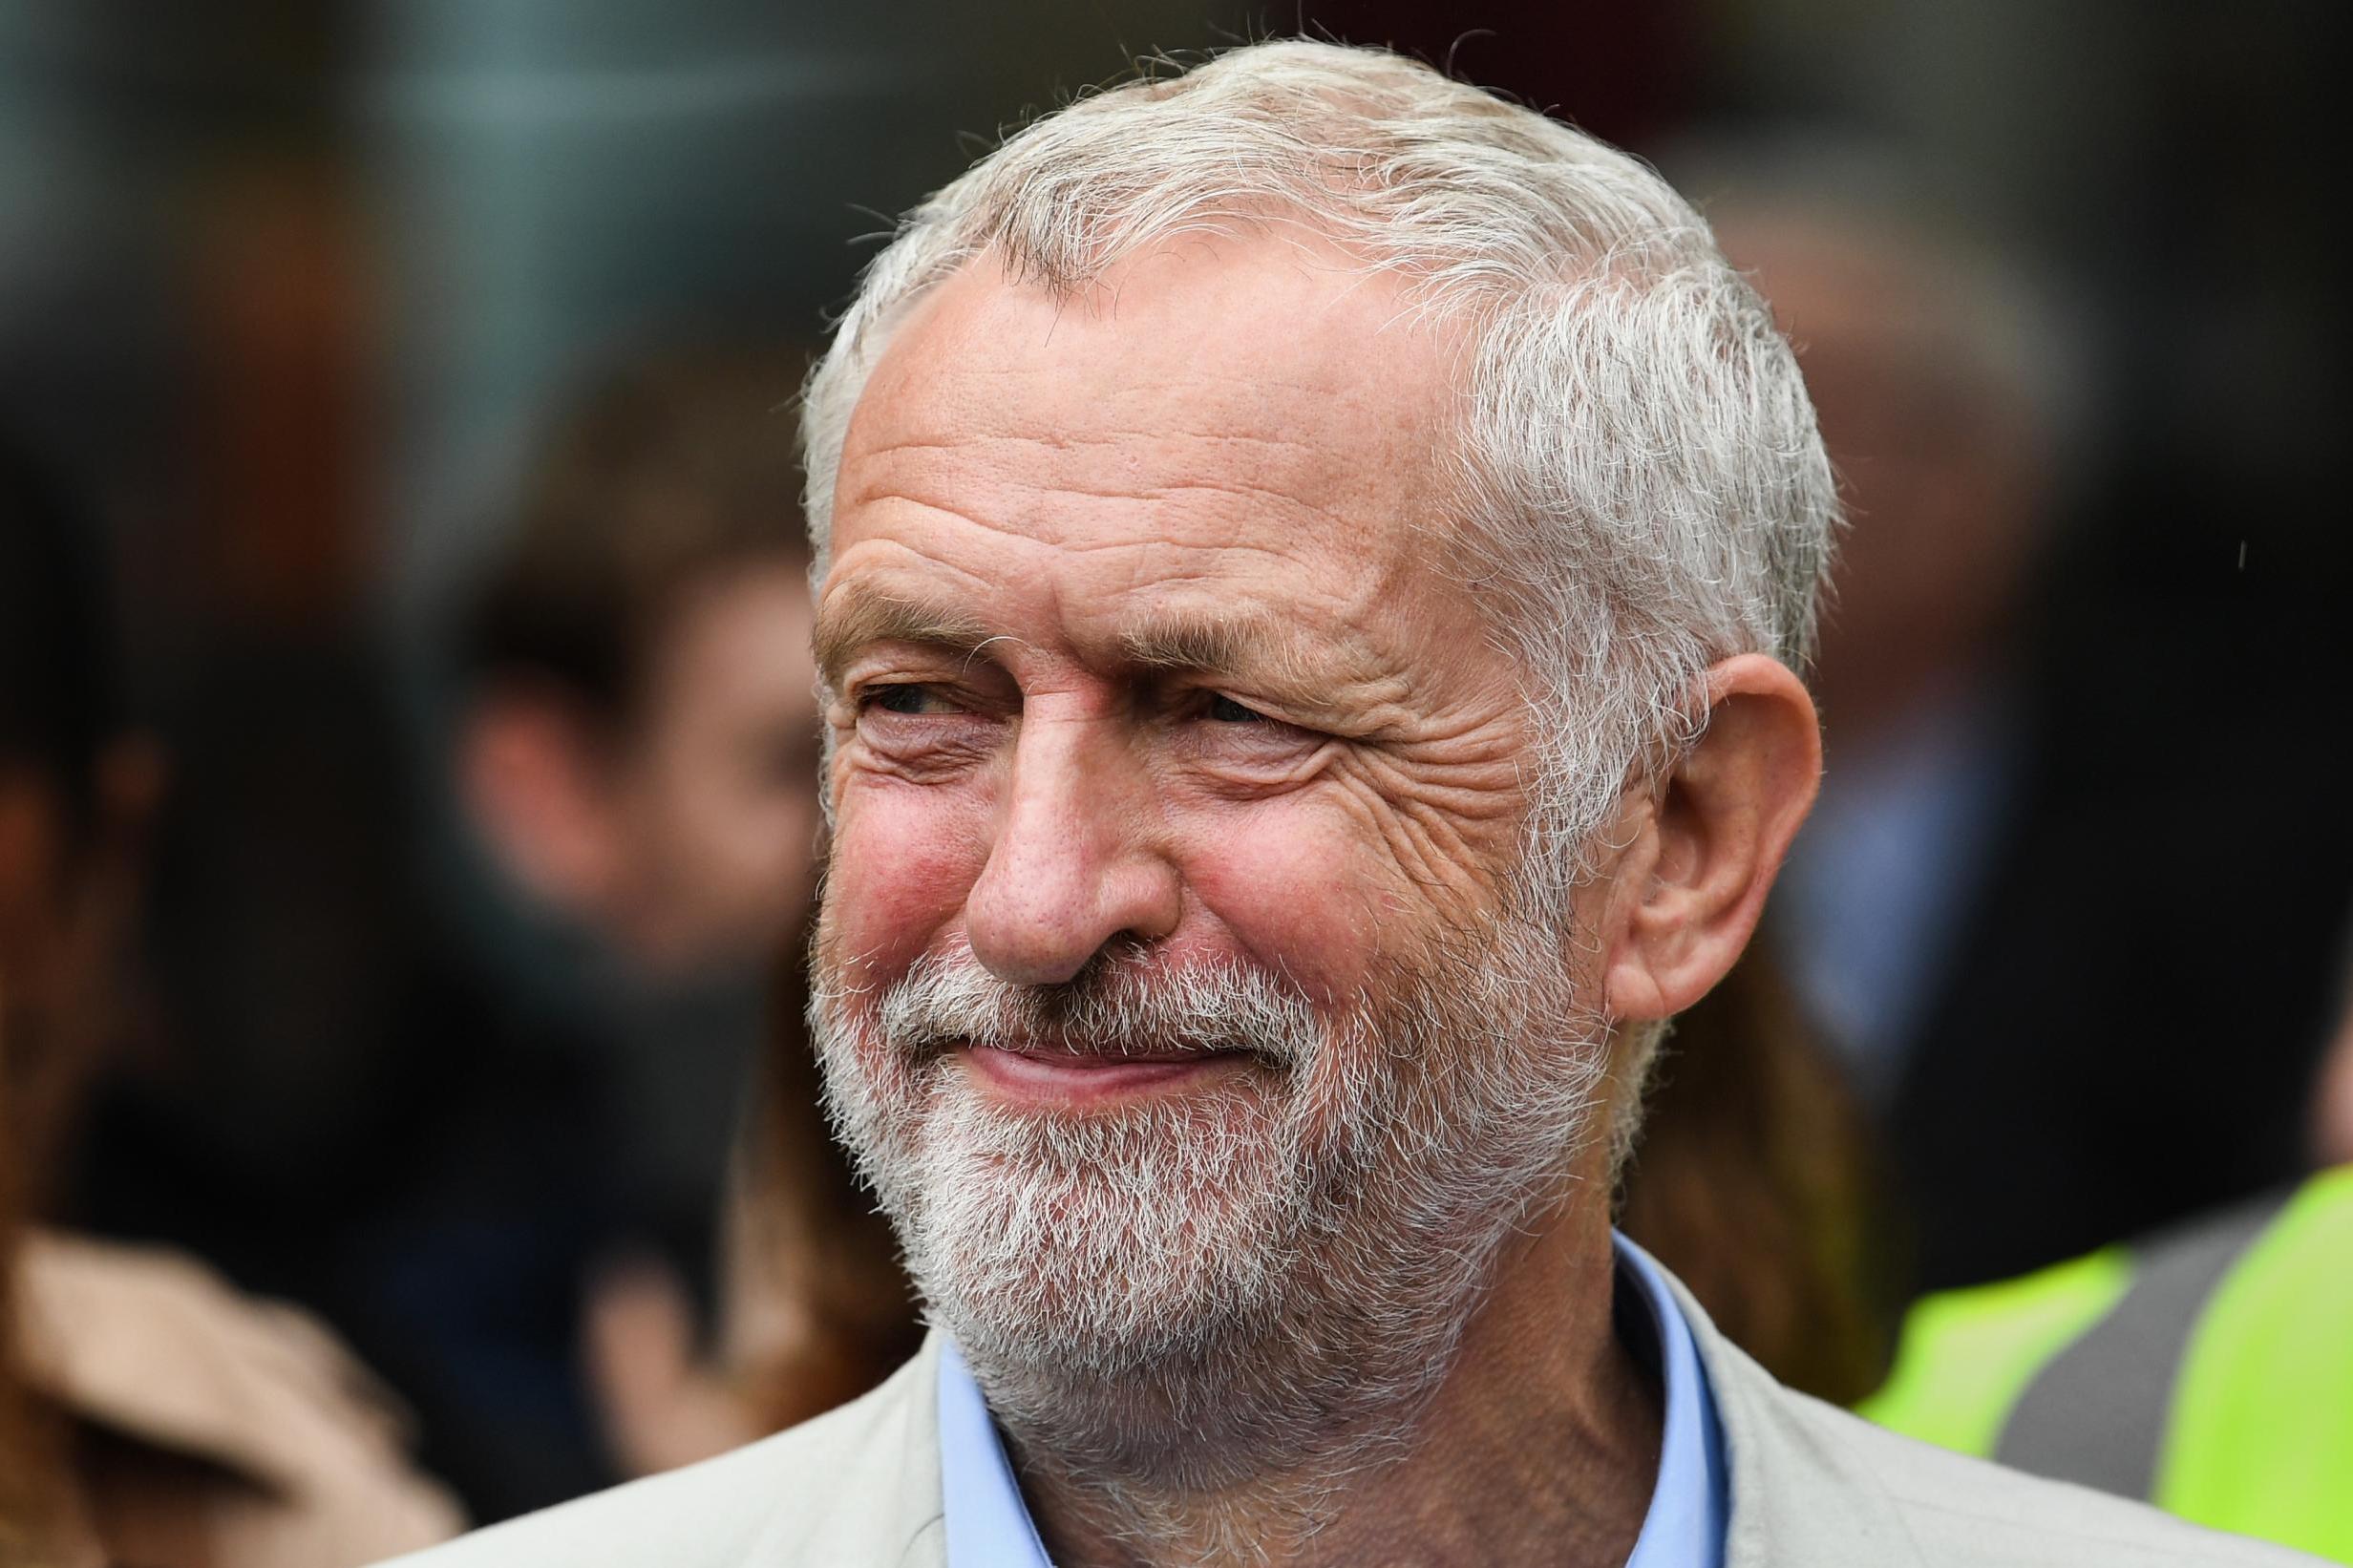 We should applaud Jeremy Corbyn’s decision in the face of his historical Euroscepticism